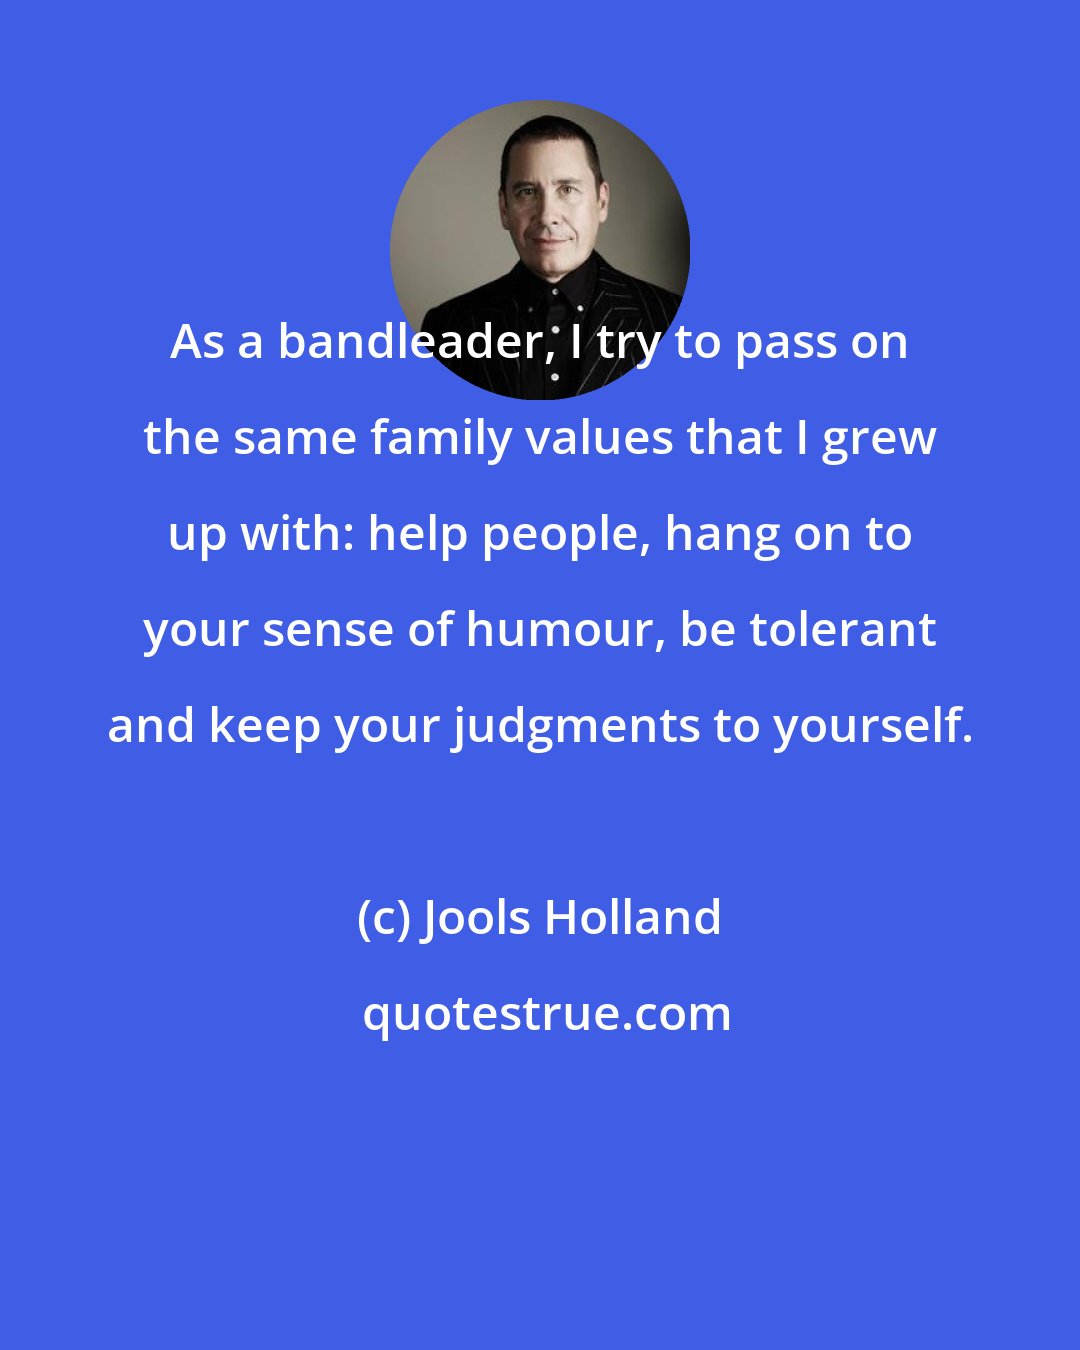 Jools Holland: As a bandleader, I try to pass on the same family values that I grew up with: help people, hang on to your sense of humour, be tolerant and keep your judgments to yourself.